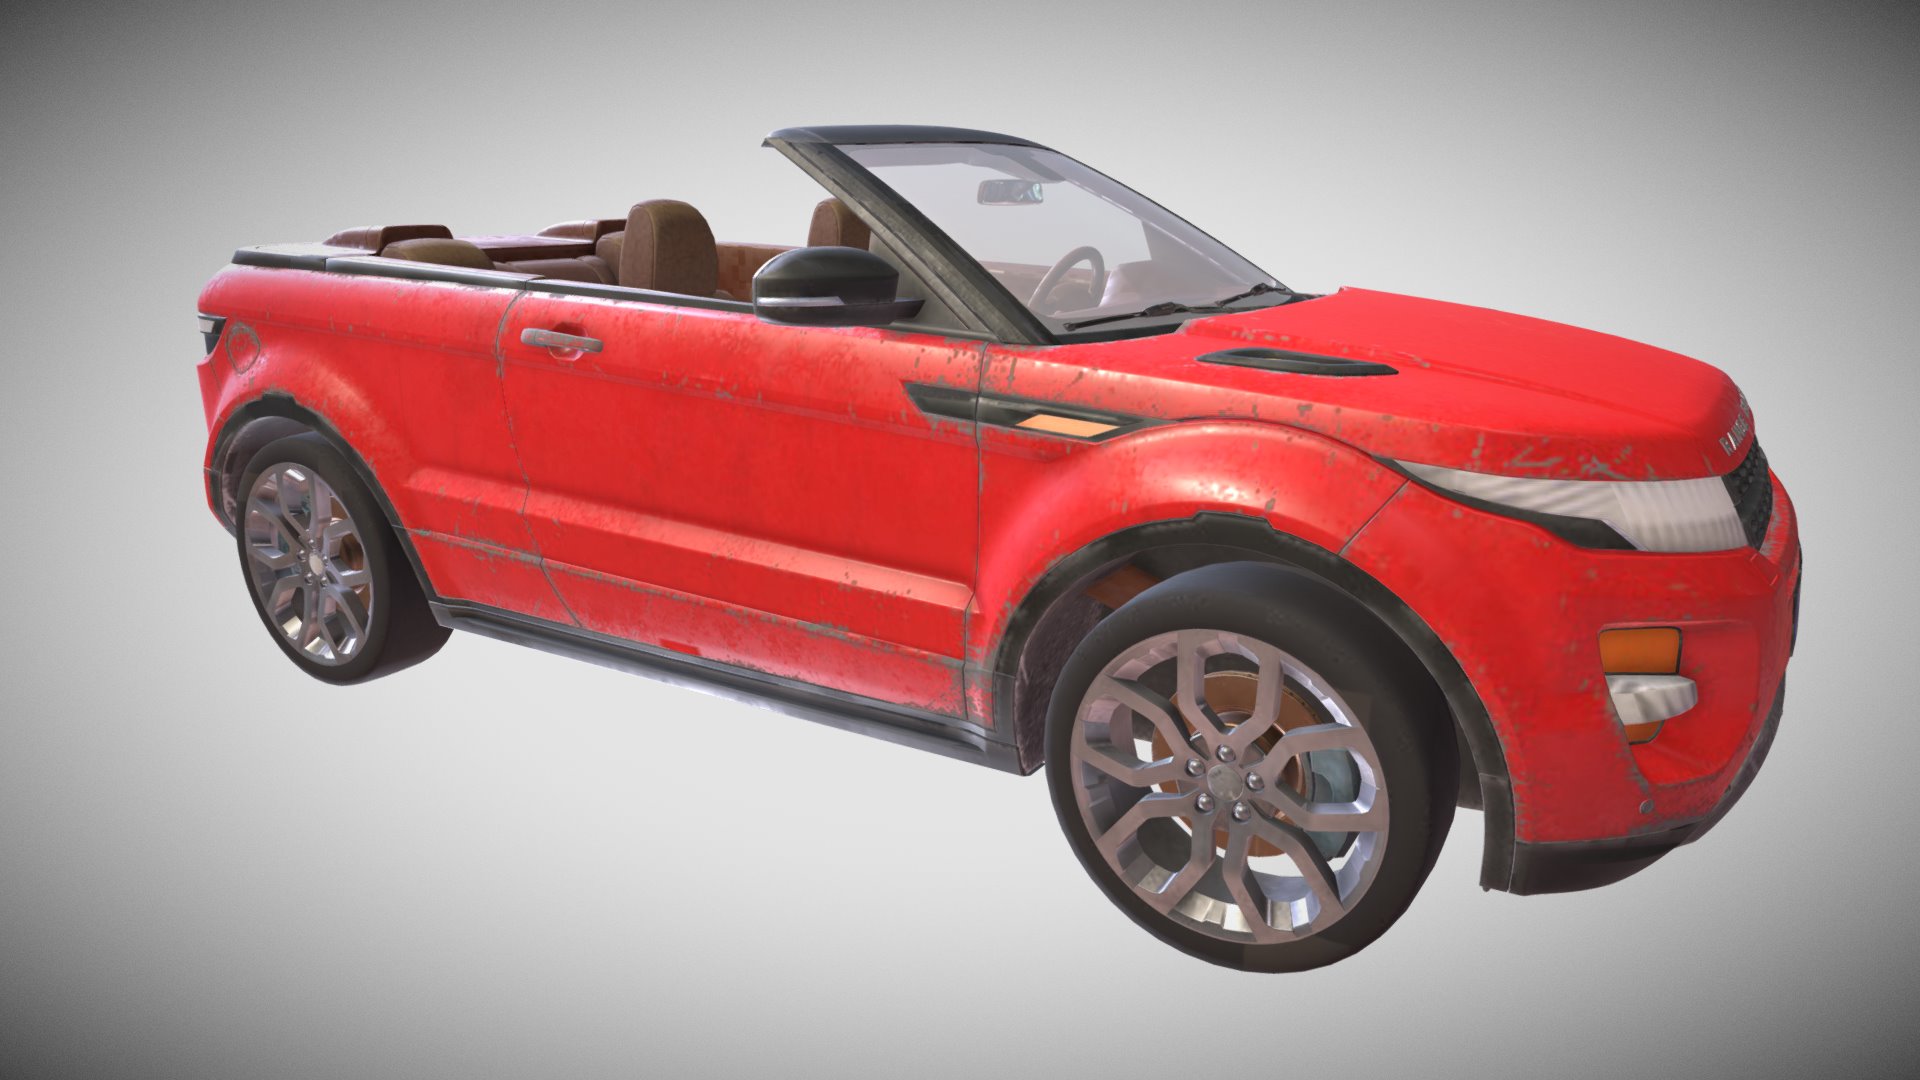 3D model Range Rover Cabriolet - This is a 3D model of the Range Rover Cabriolet. The 3D model is about a red sports car.